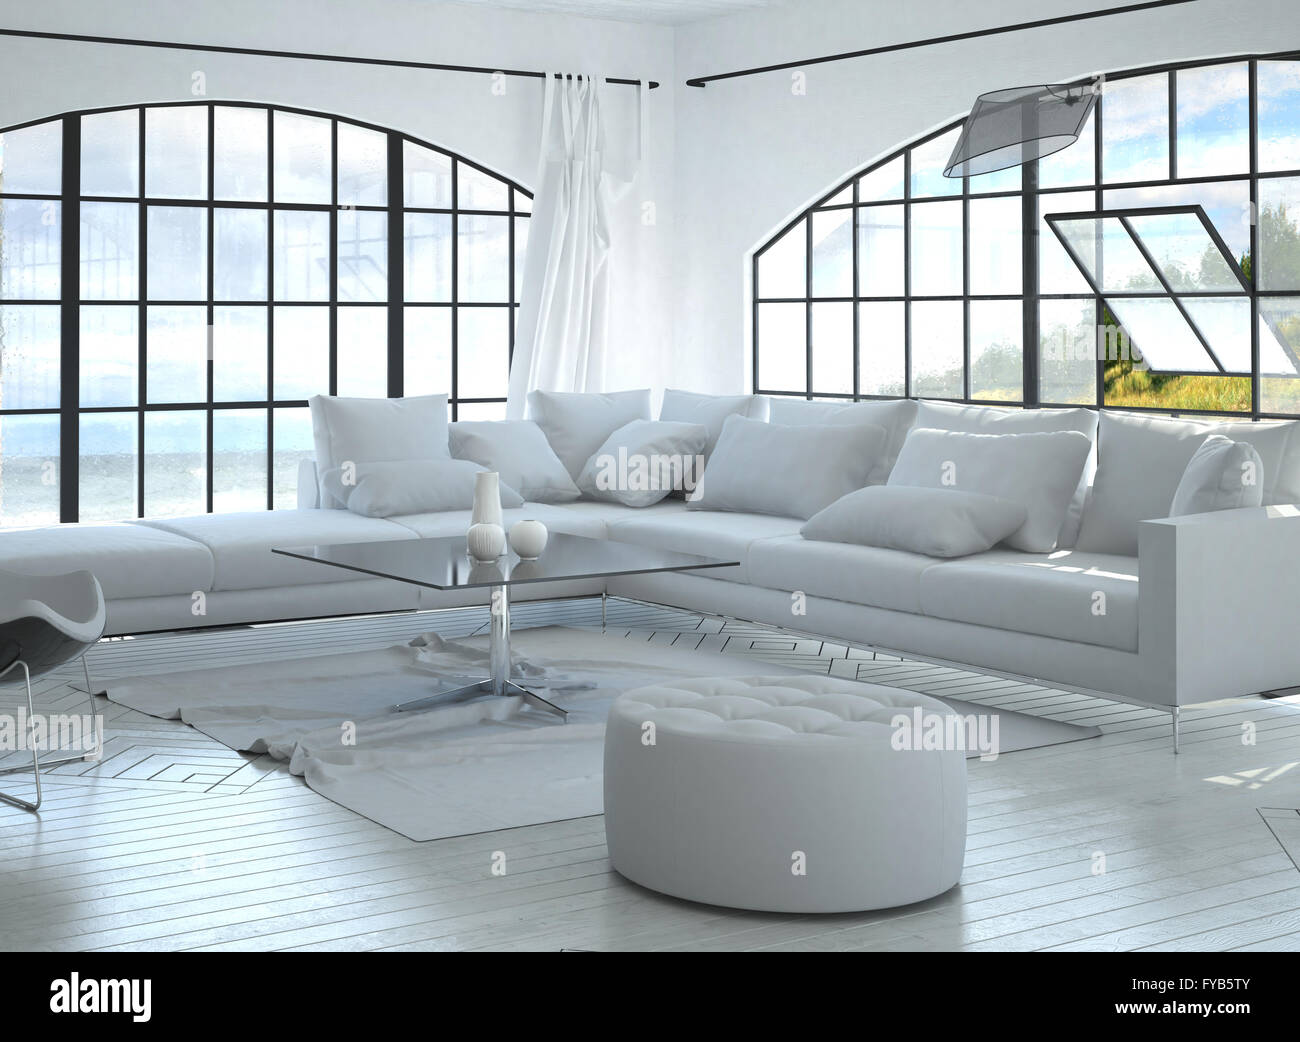 3d Render Interior Of Spacious Living Room With Glass Coffee Table White Sofa Matching Stool And Hilly Background Seen Through Large Pivoting Window 3d Rendering Stock Photo Alamy